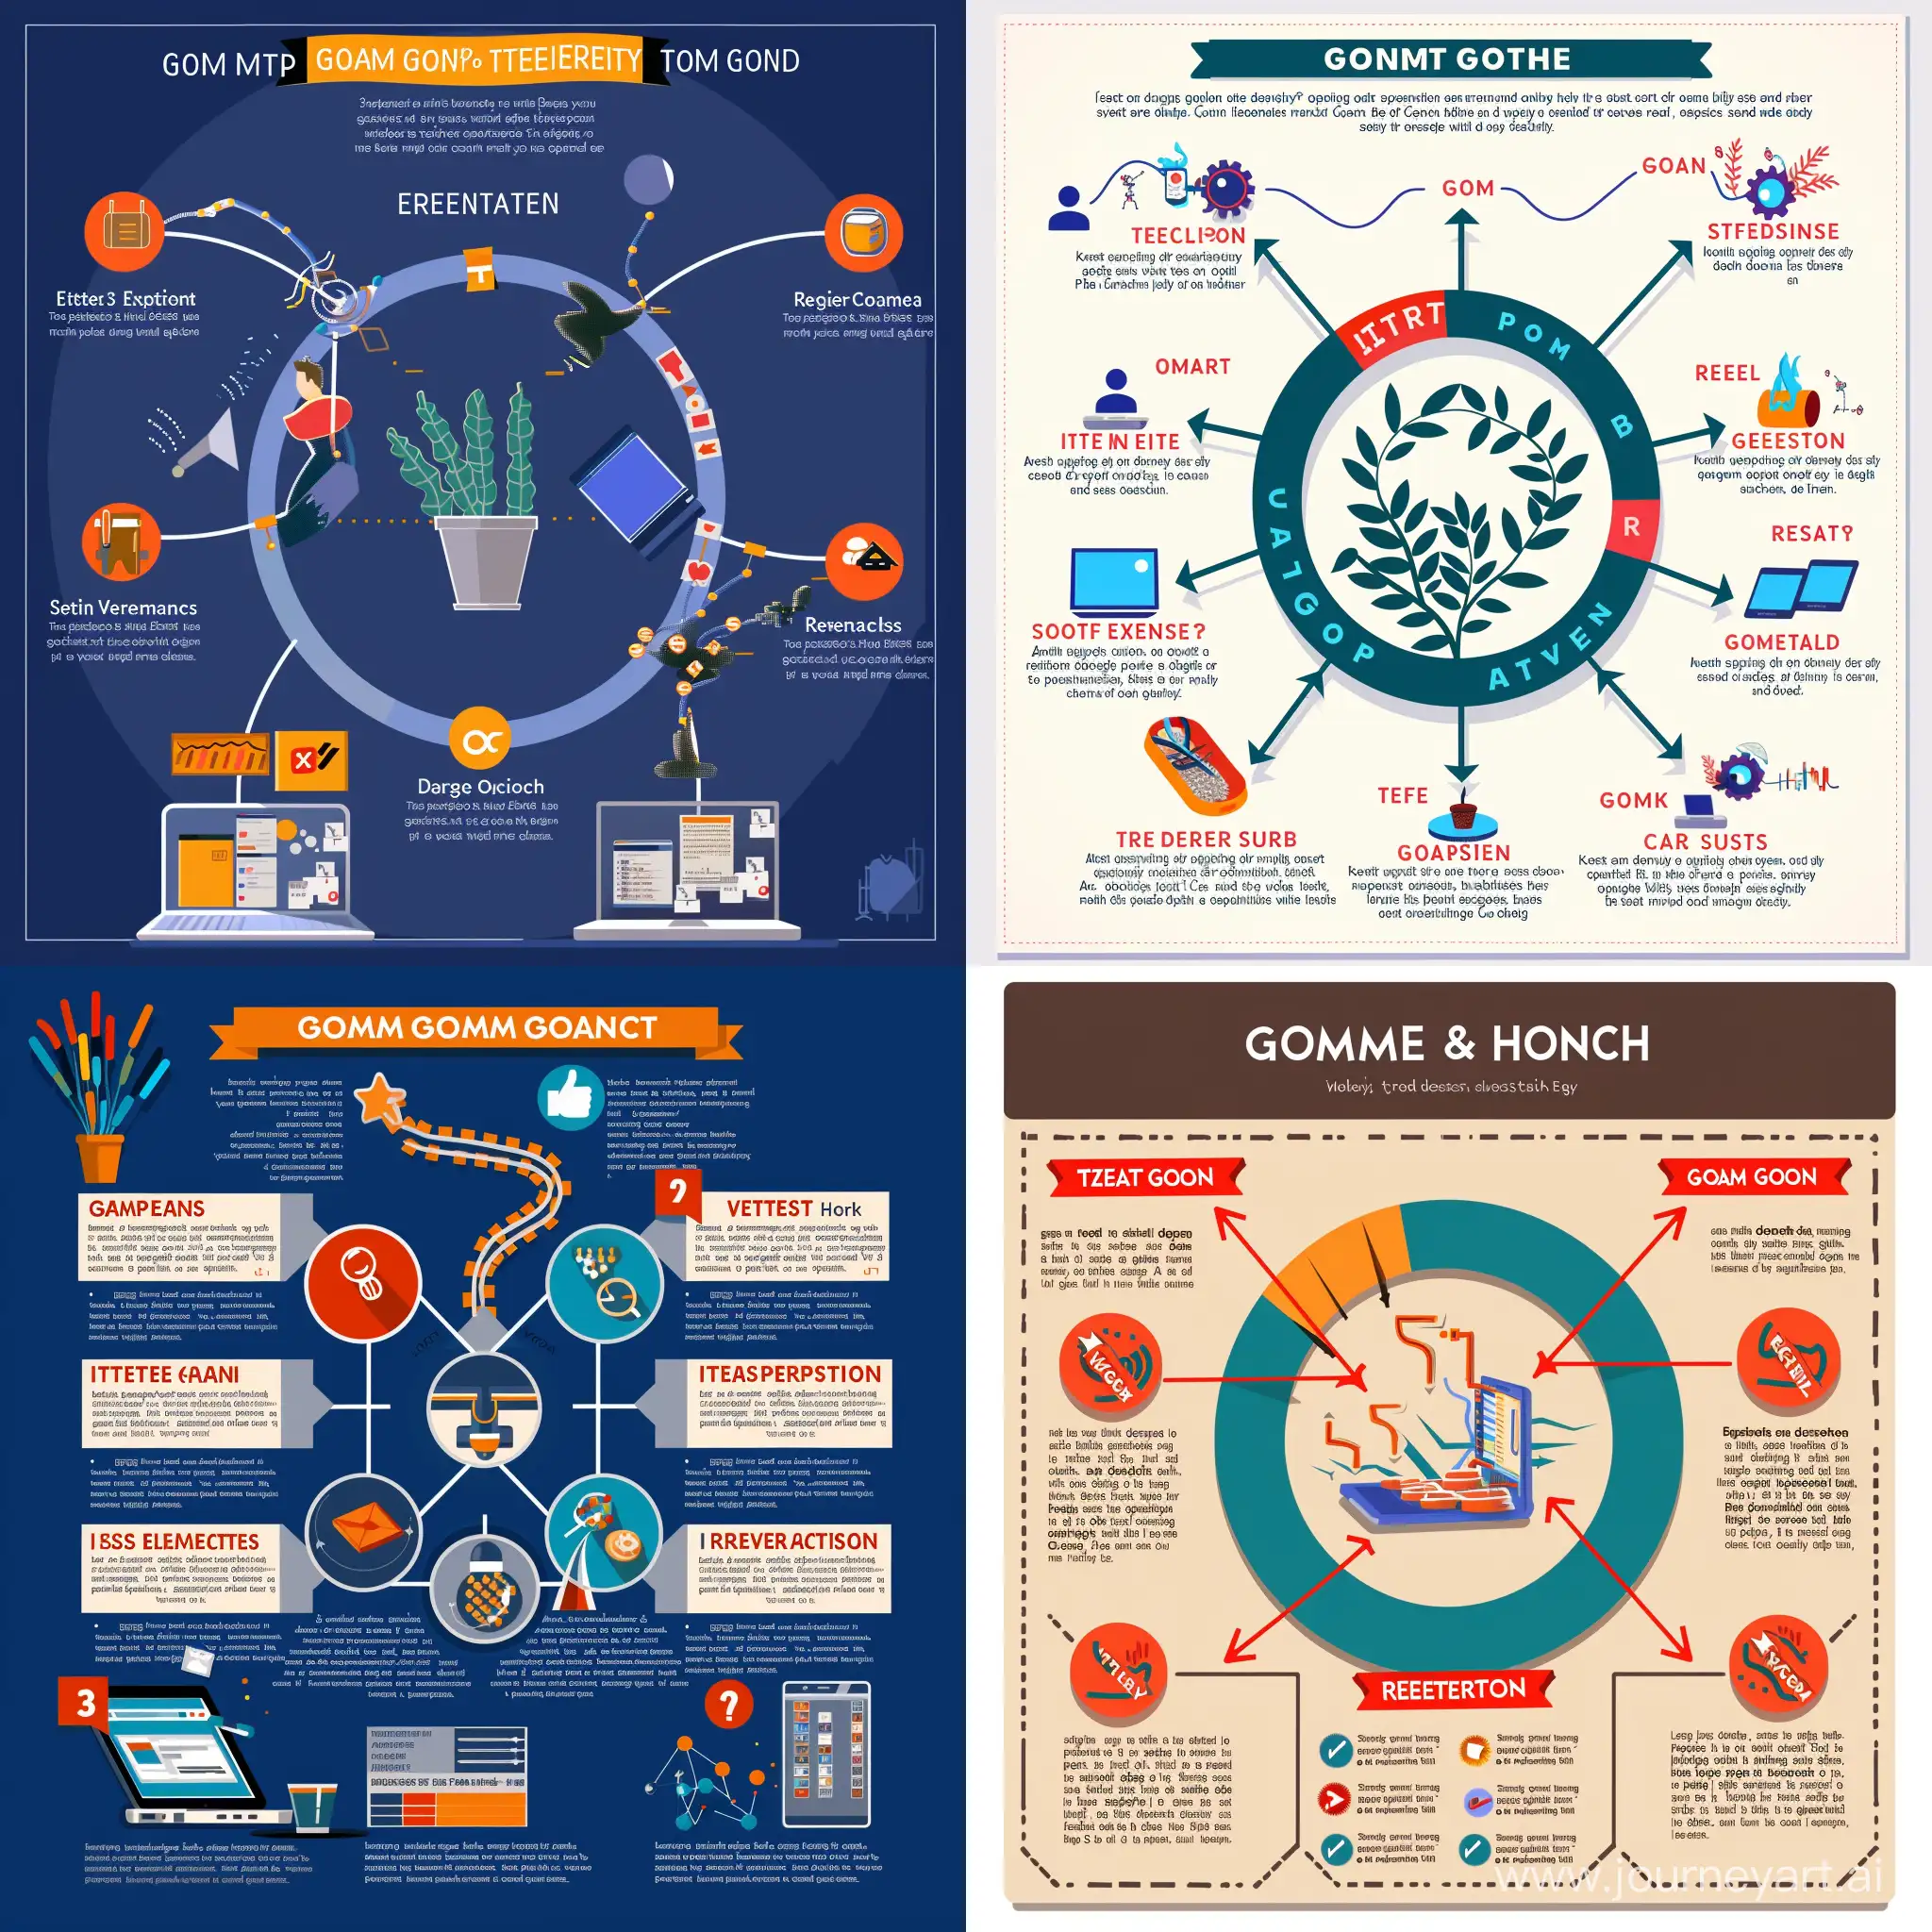 create an infographic, about the growth hack process, with a cycle with 3 steps of setting goals and iterating experiments and reevaluating